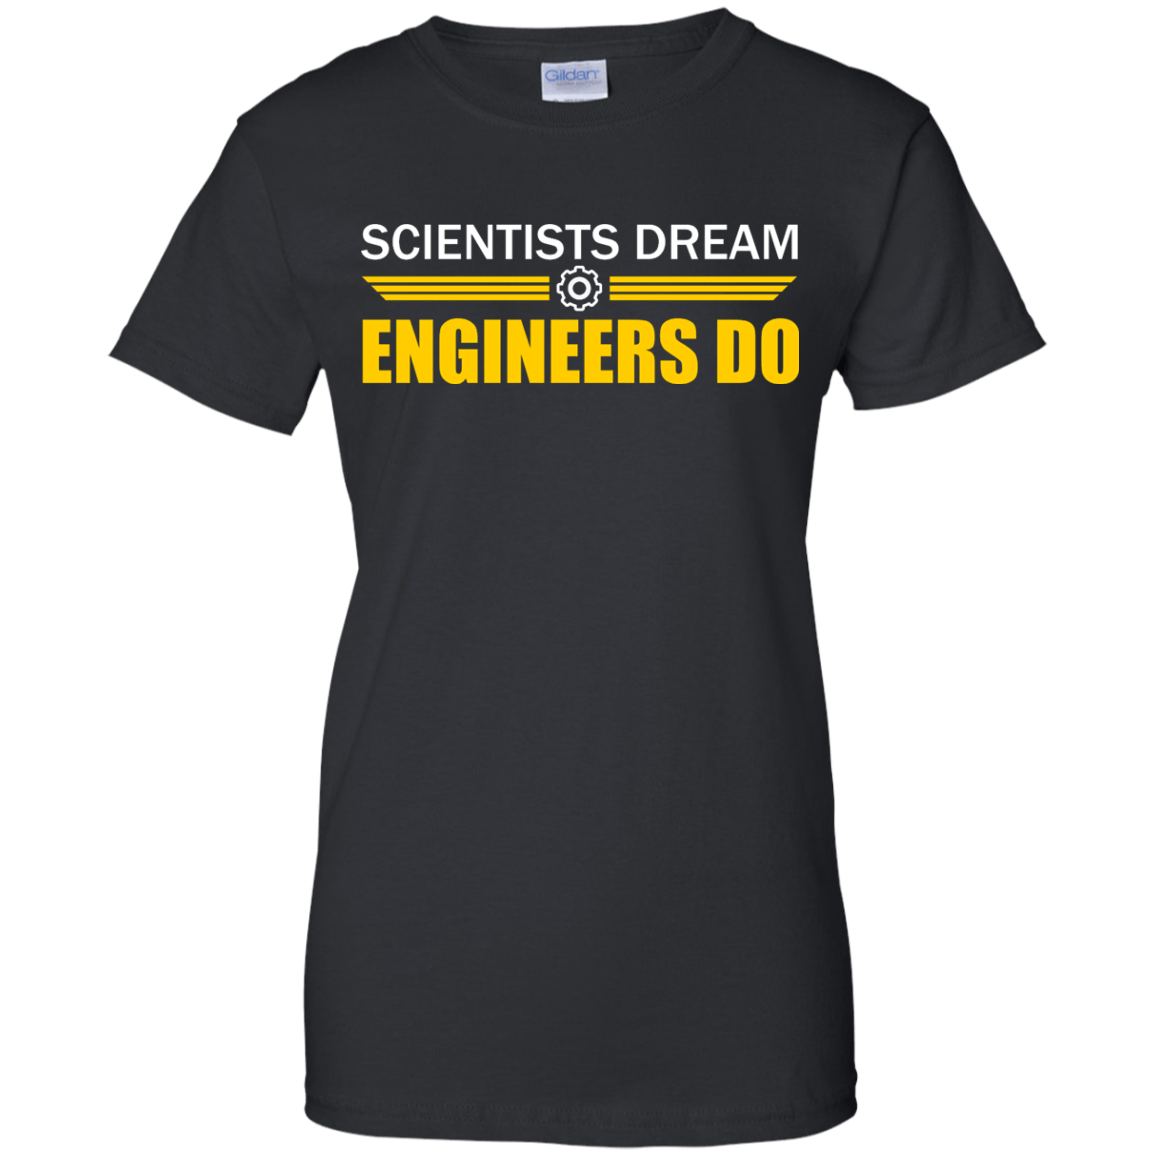 Scientists Dream - Engineers Do - Engineering Outfitters